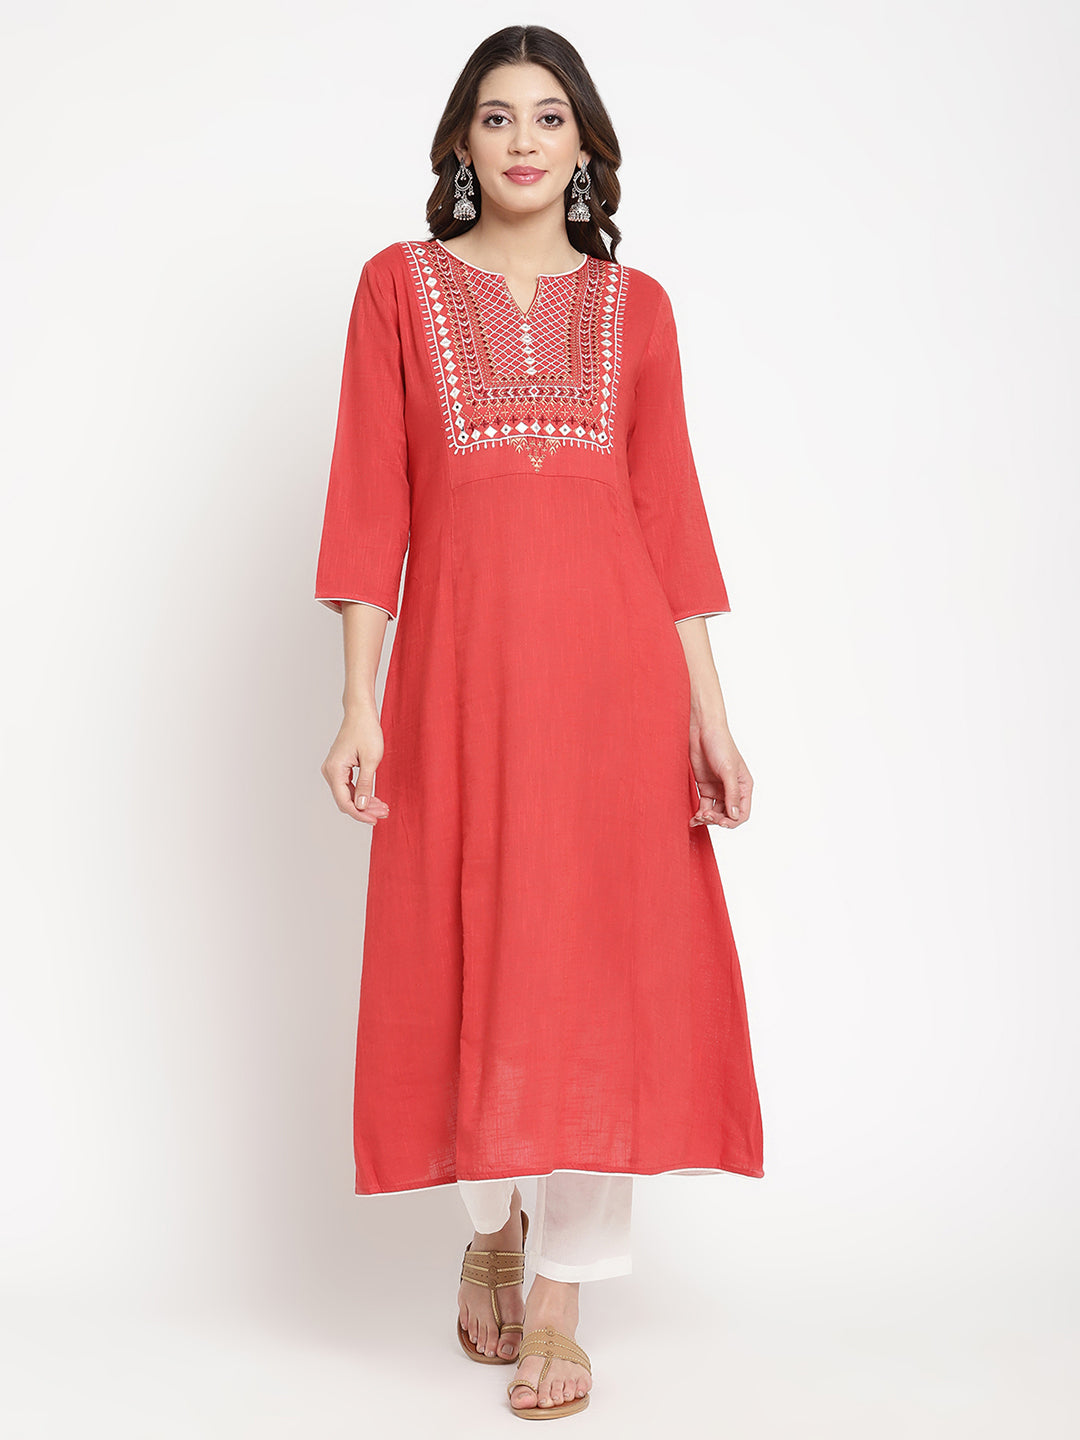 Woman wearing a red embroidered Kurta in an A-line silhouette. 